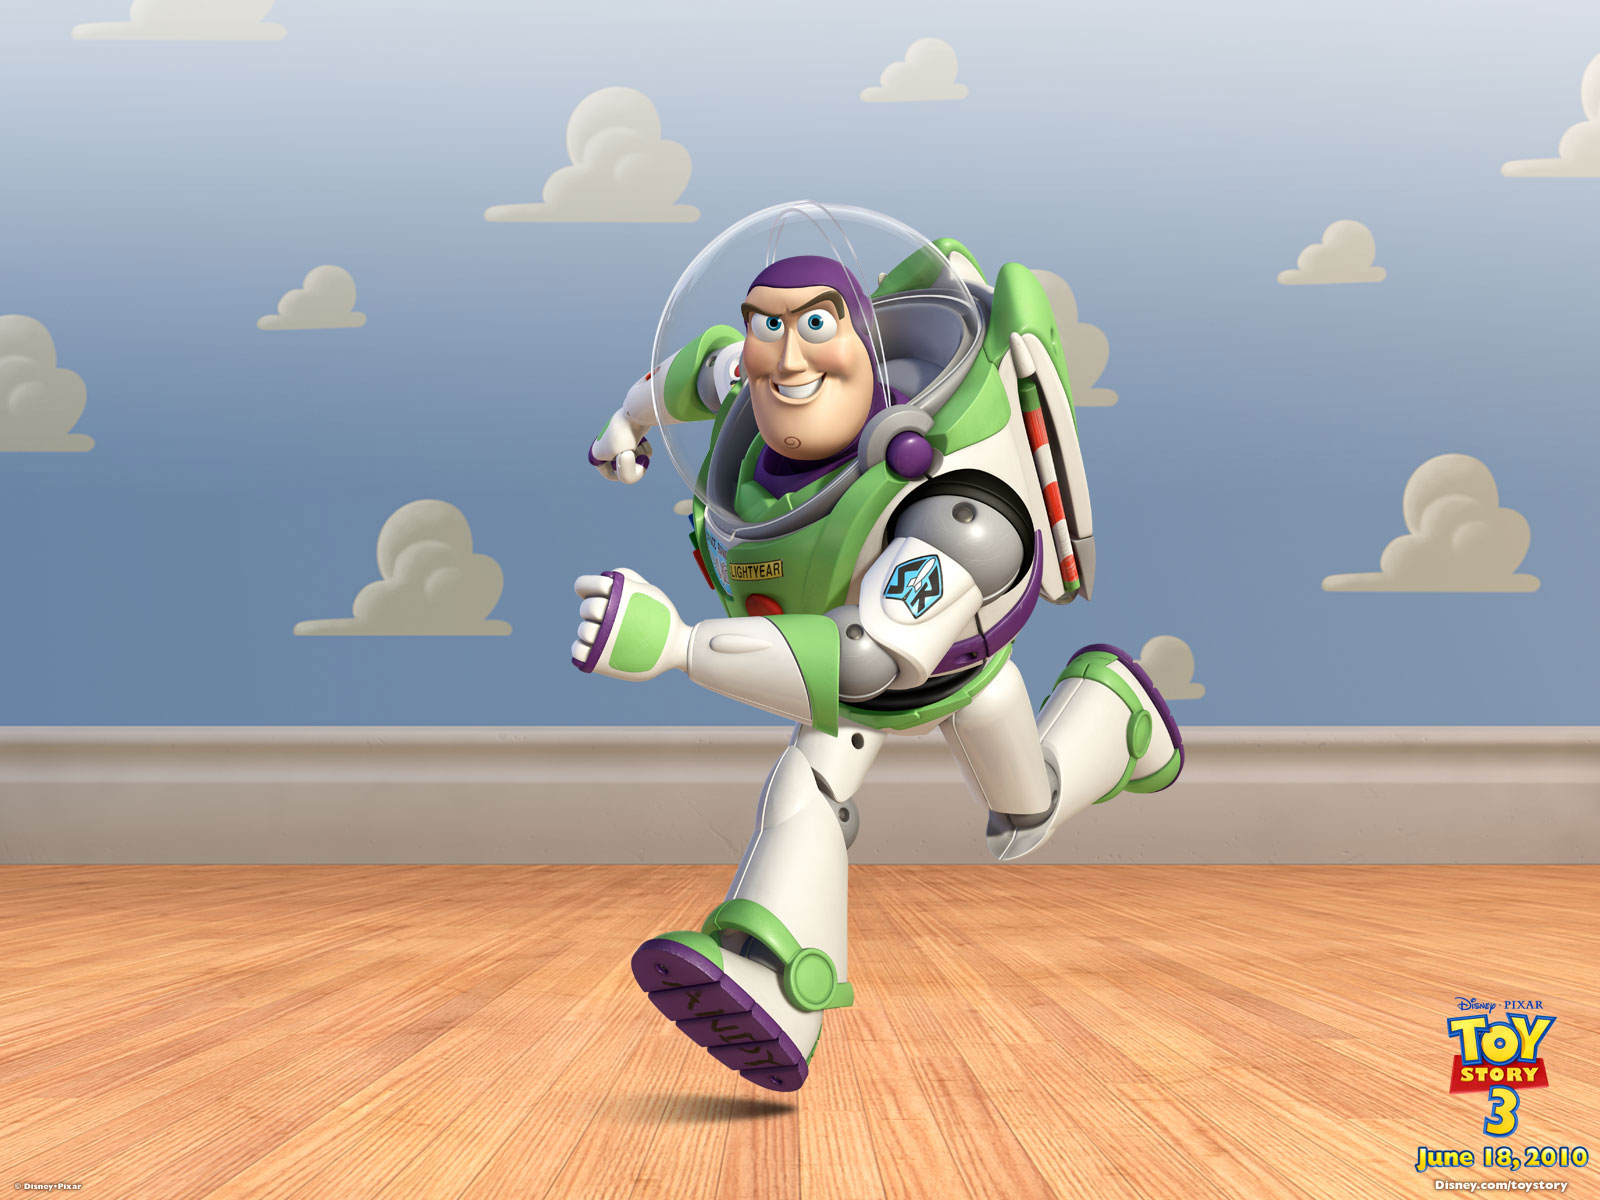 Download this Toy Story Buzz Lightyear picture